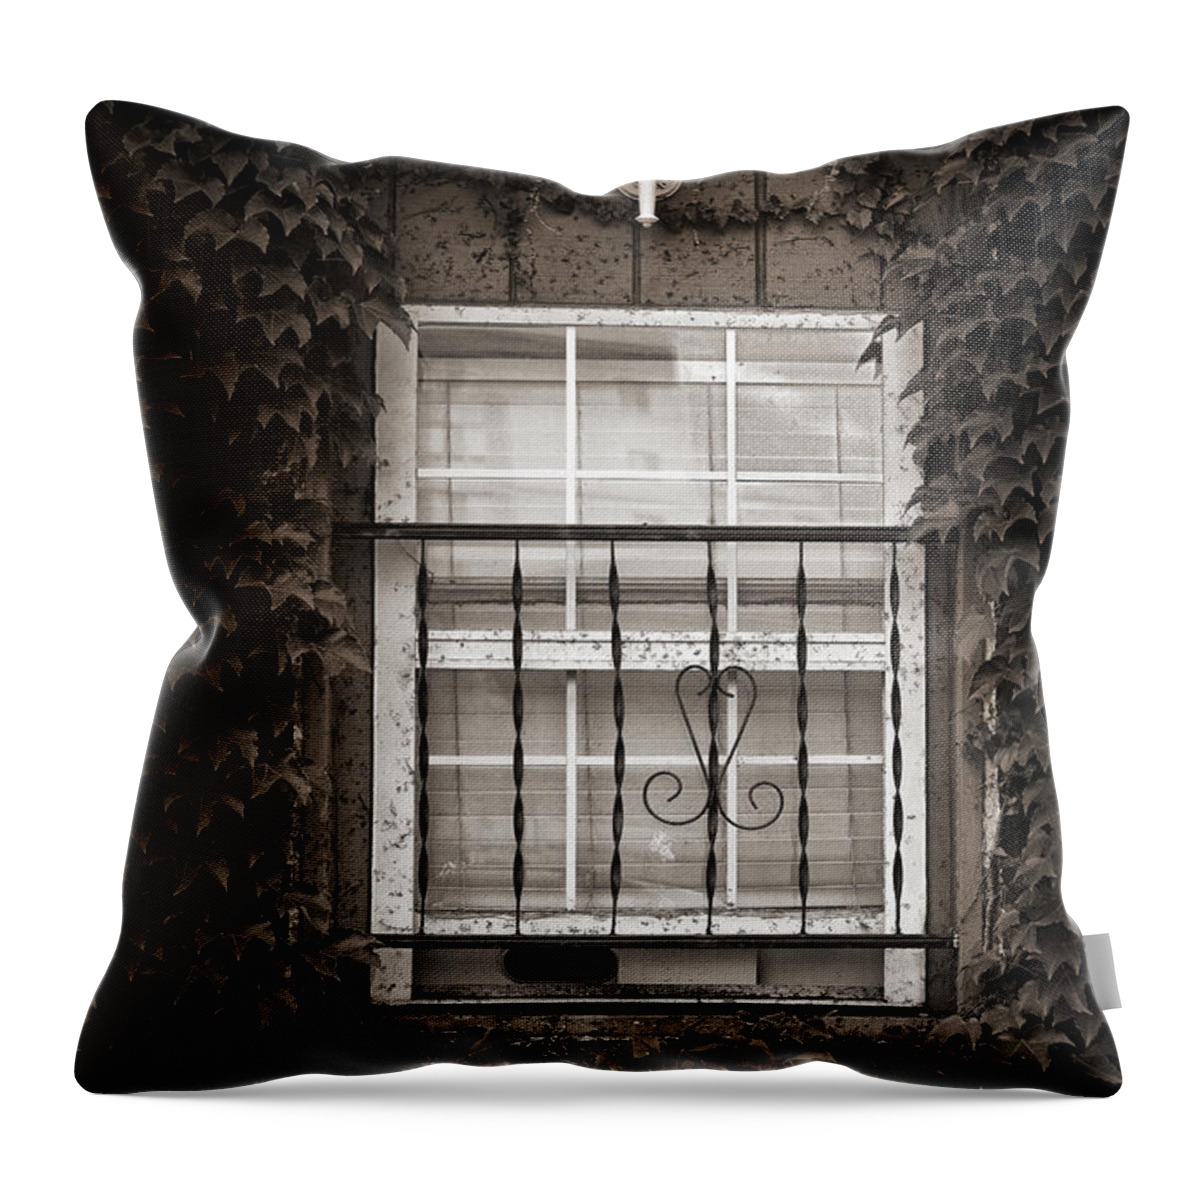 Sepia Throw Pillow featuring the photograph City Window Detail by Dick Pratt